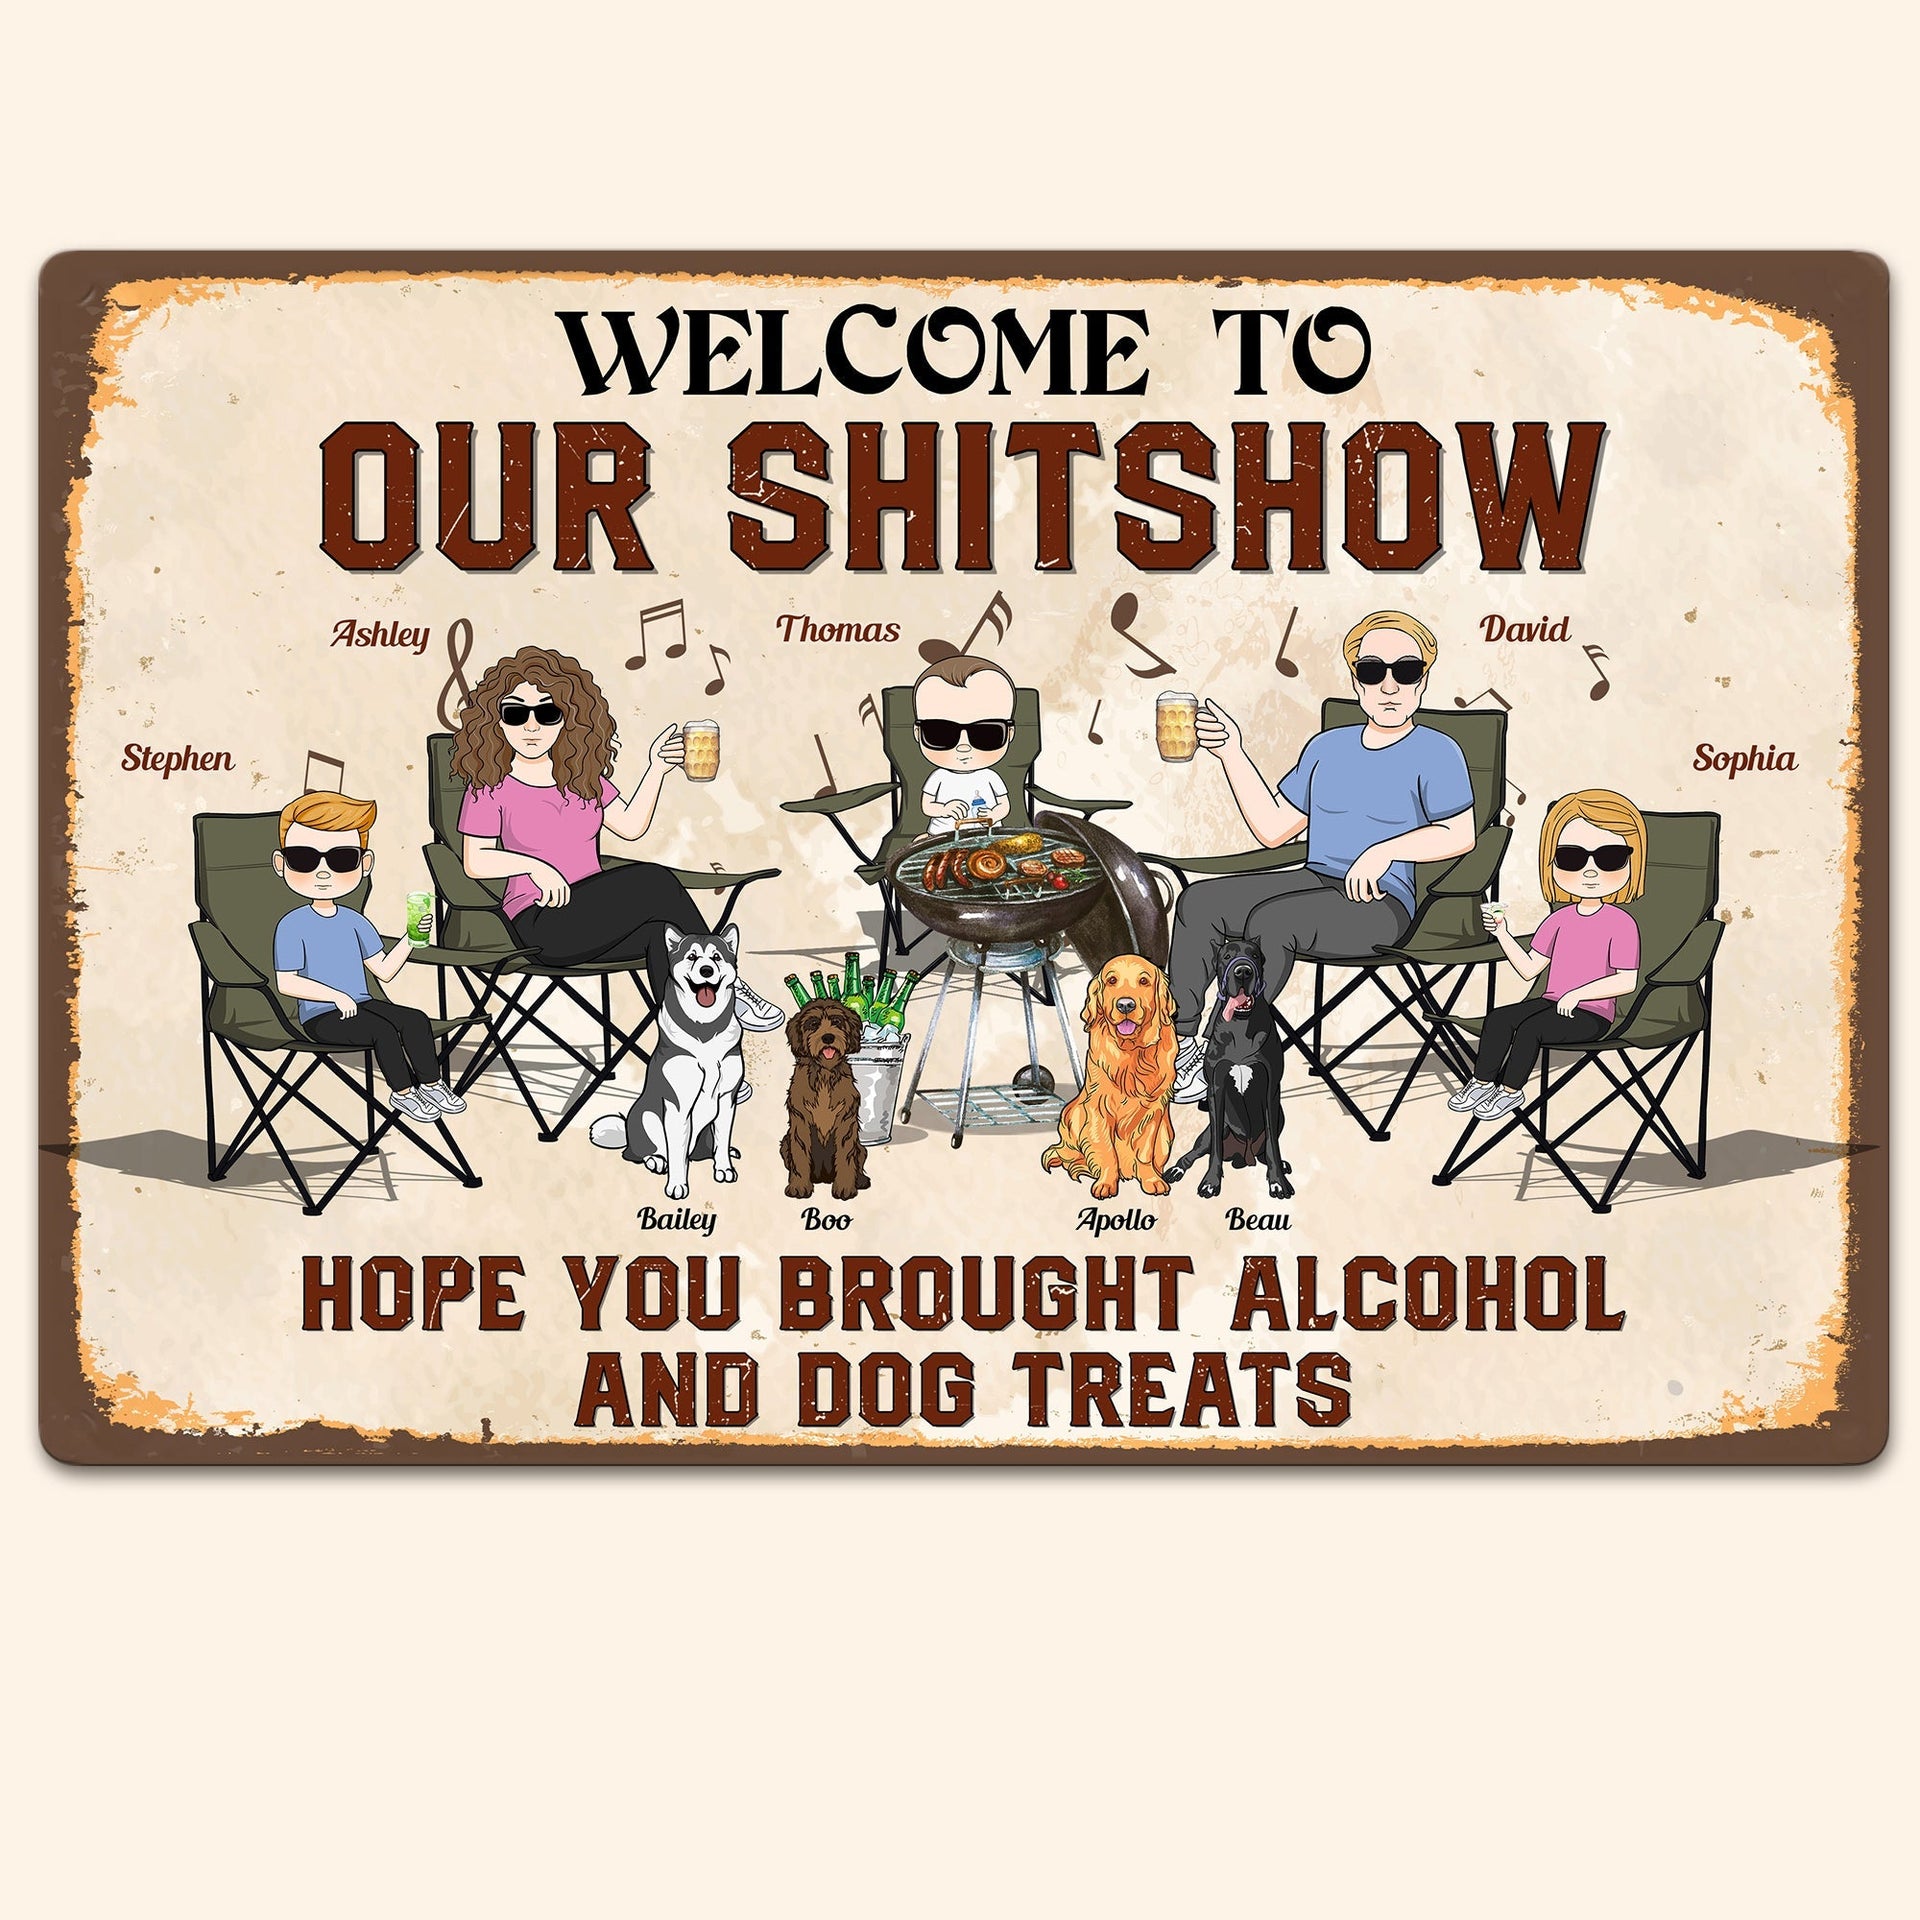 Our Shitshow Alcohol And Dog Treats - Personalized Metal Sign - Birthday Gift For Family, Dog Lover, Husband, Wife